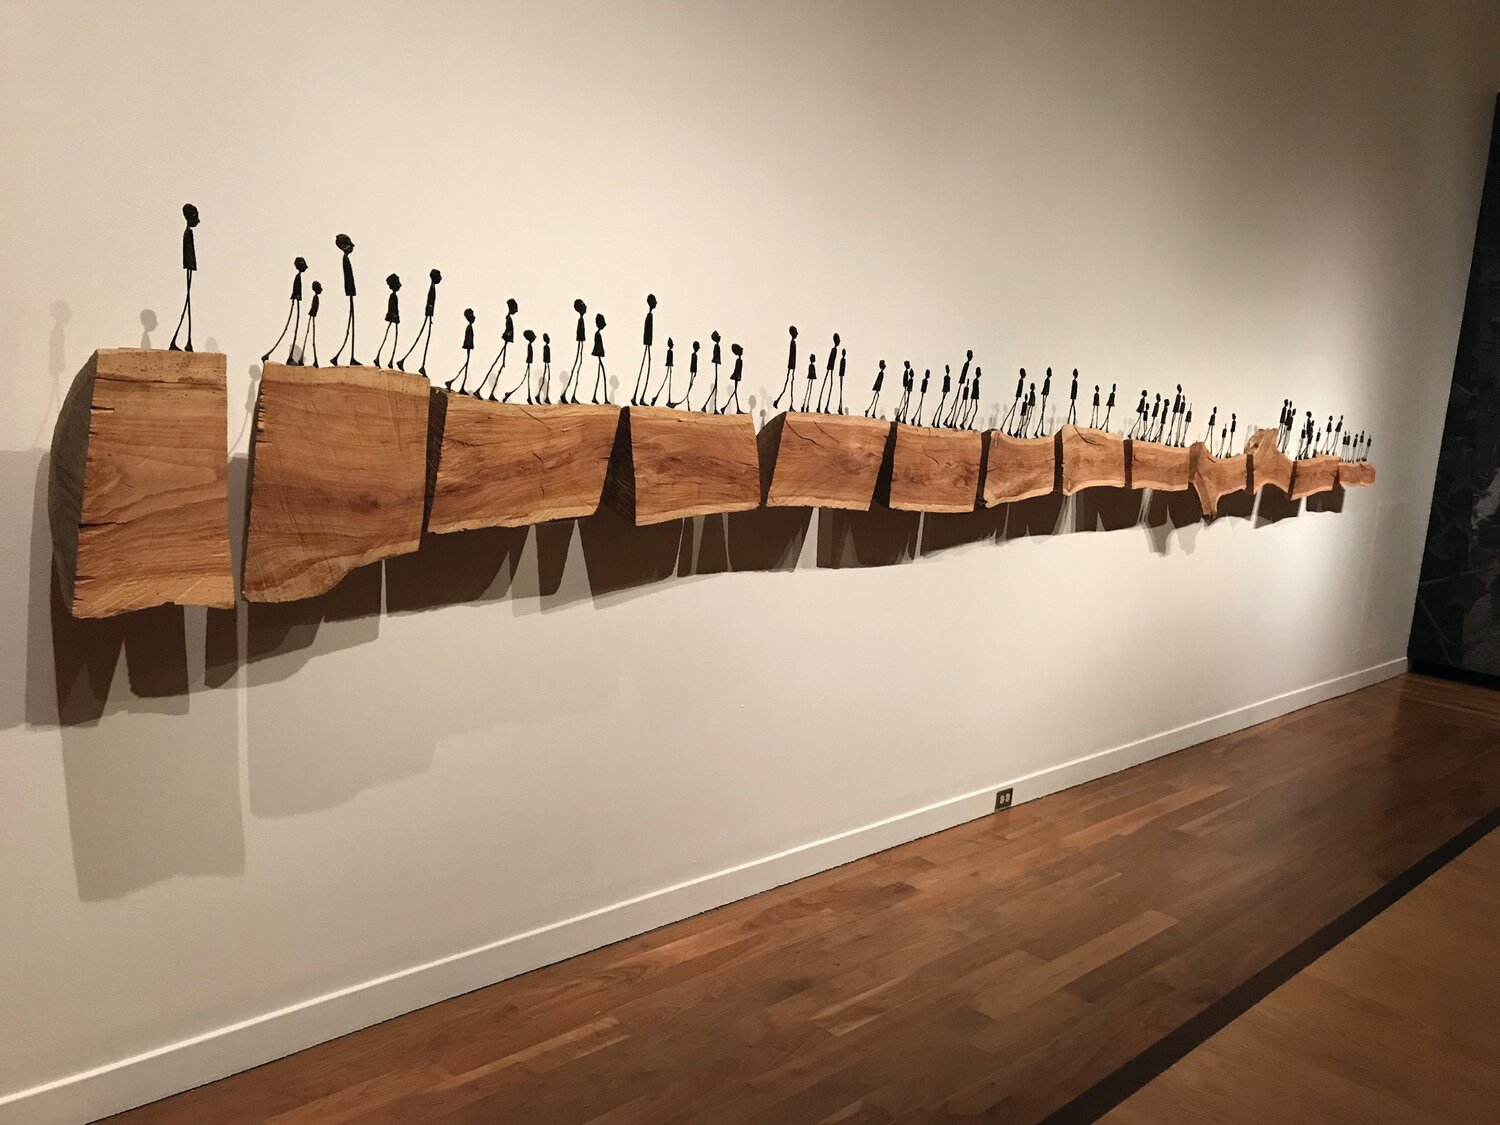 In “Bloodline” by Holly Wilson bronze figures cast from cigars and found sticks traverse a cut locust tree that fell down in a storm. The artist created the work after documenting her family ancestry in order to enroll herself and her children as tribal members.